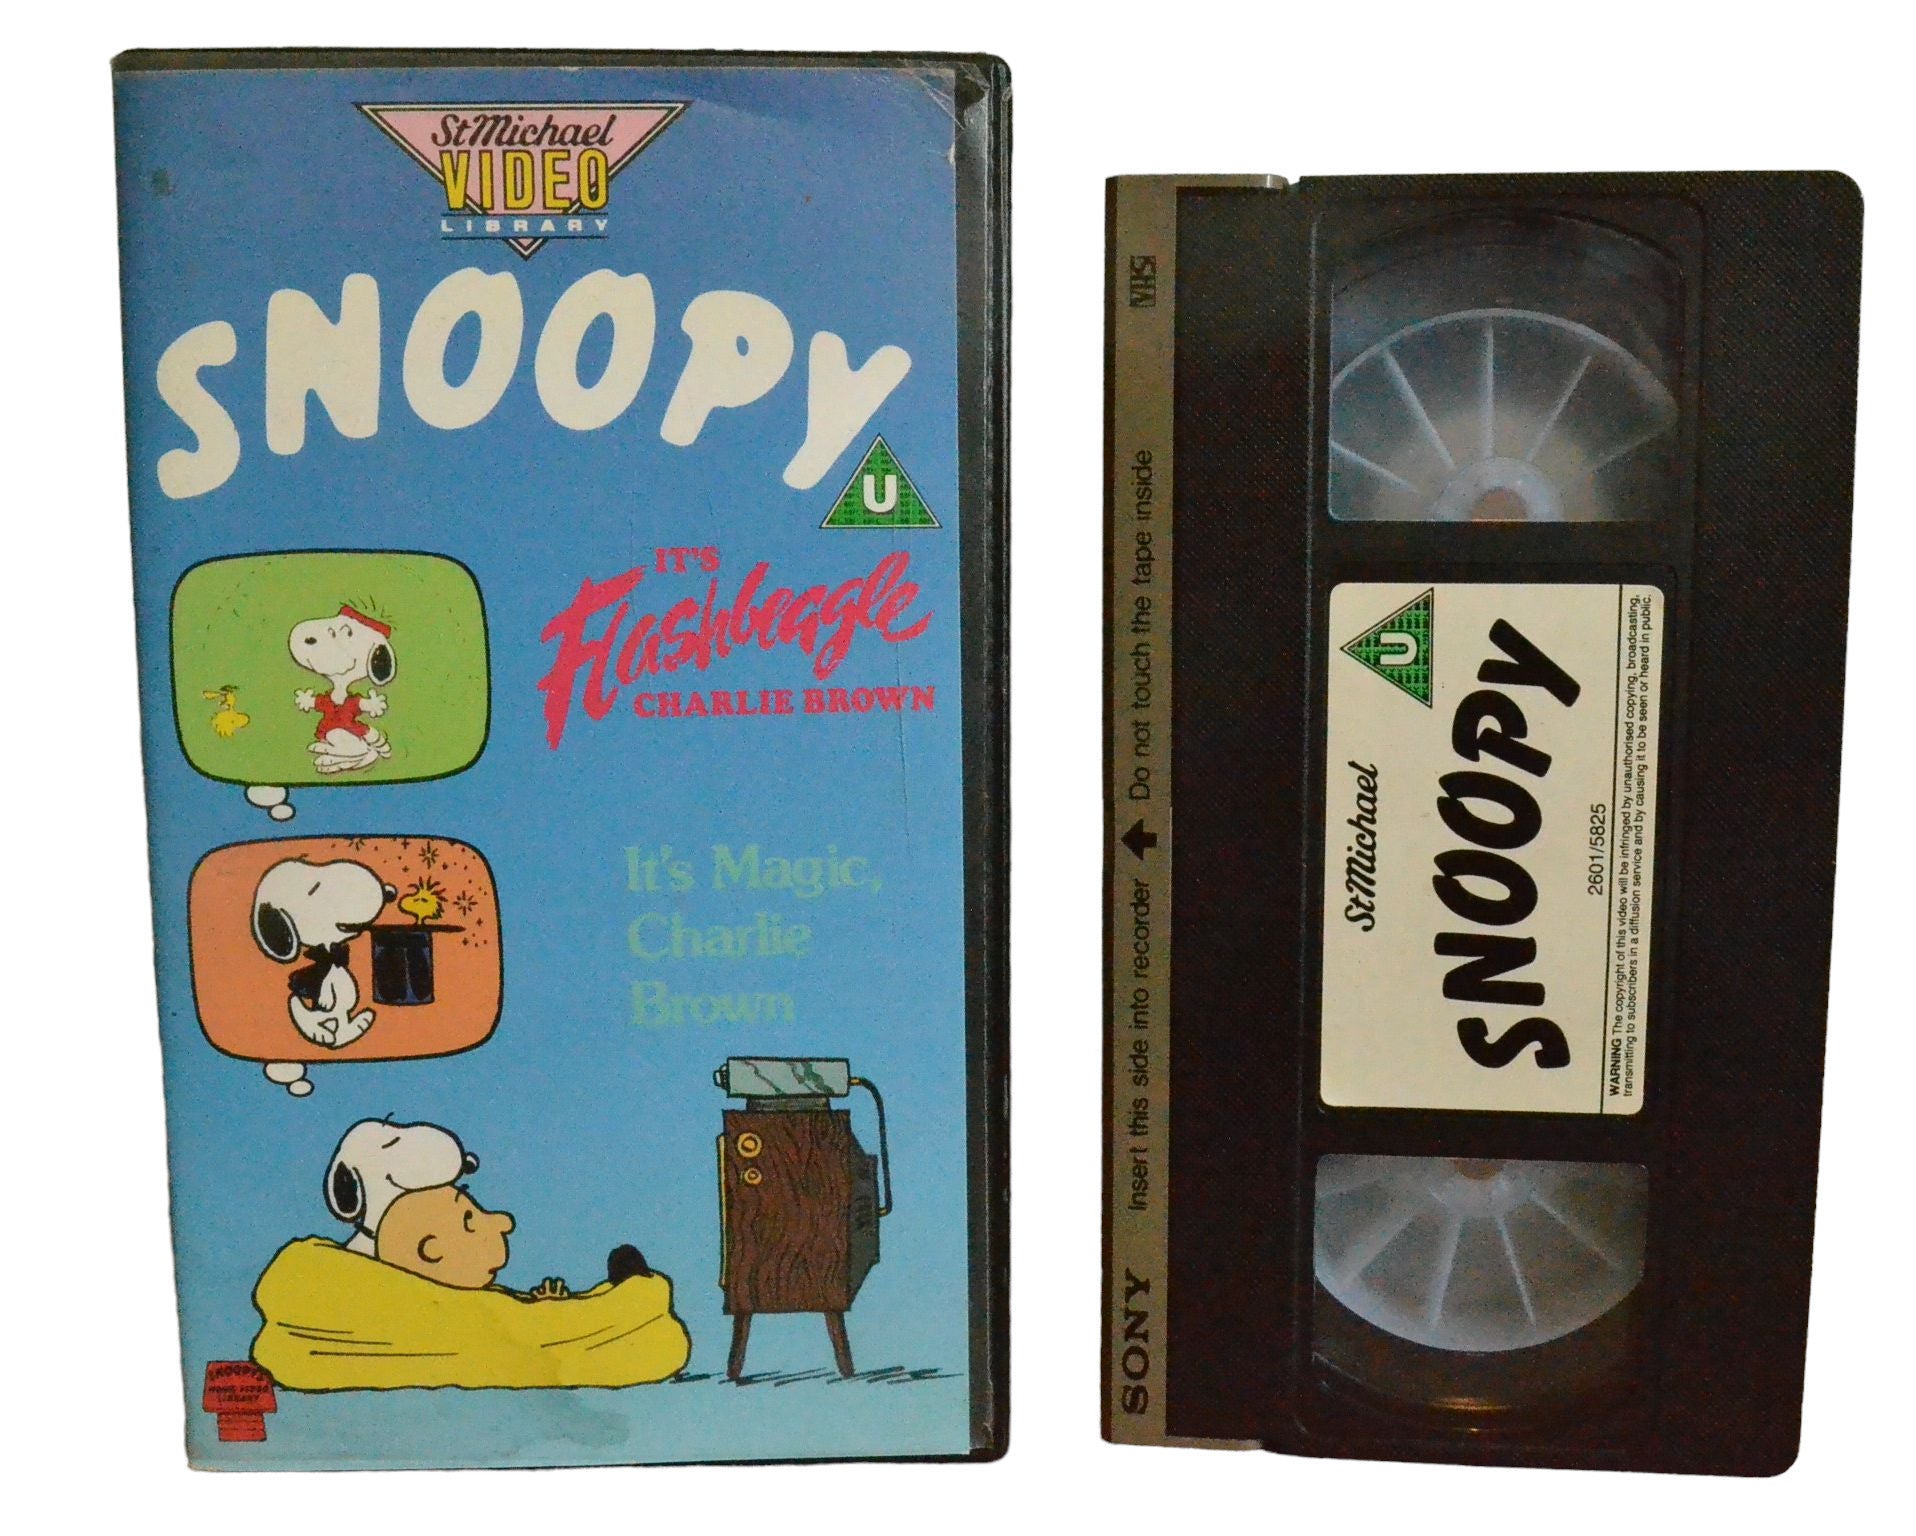 Snoopy - It's Magic Charlie Brown - Terry McGurrin - Stmichael Video - Children - Pal - VHS-